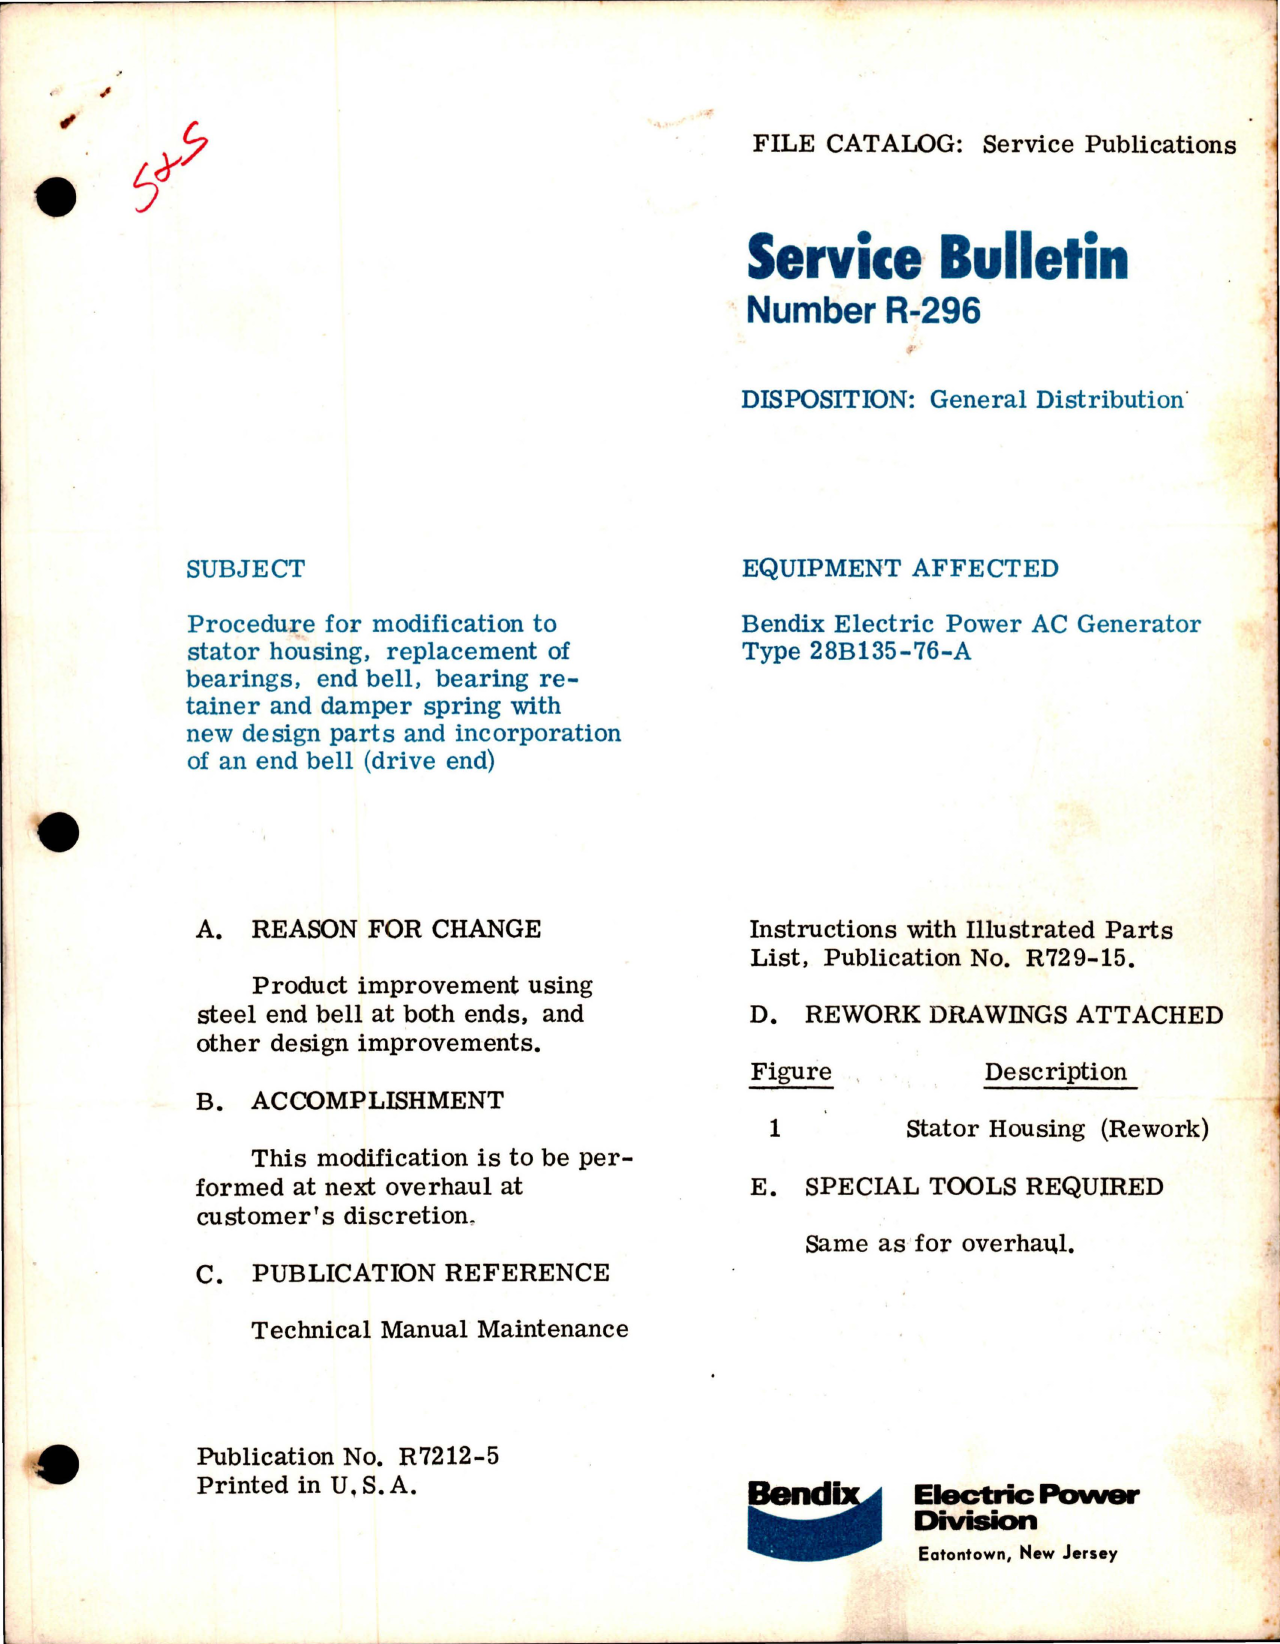 Sample page 1 from AirCorps Library document: Service Bulletin R-296 for Electric Power AC Generator - Type 28B135-76-A